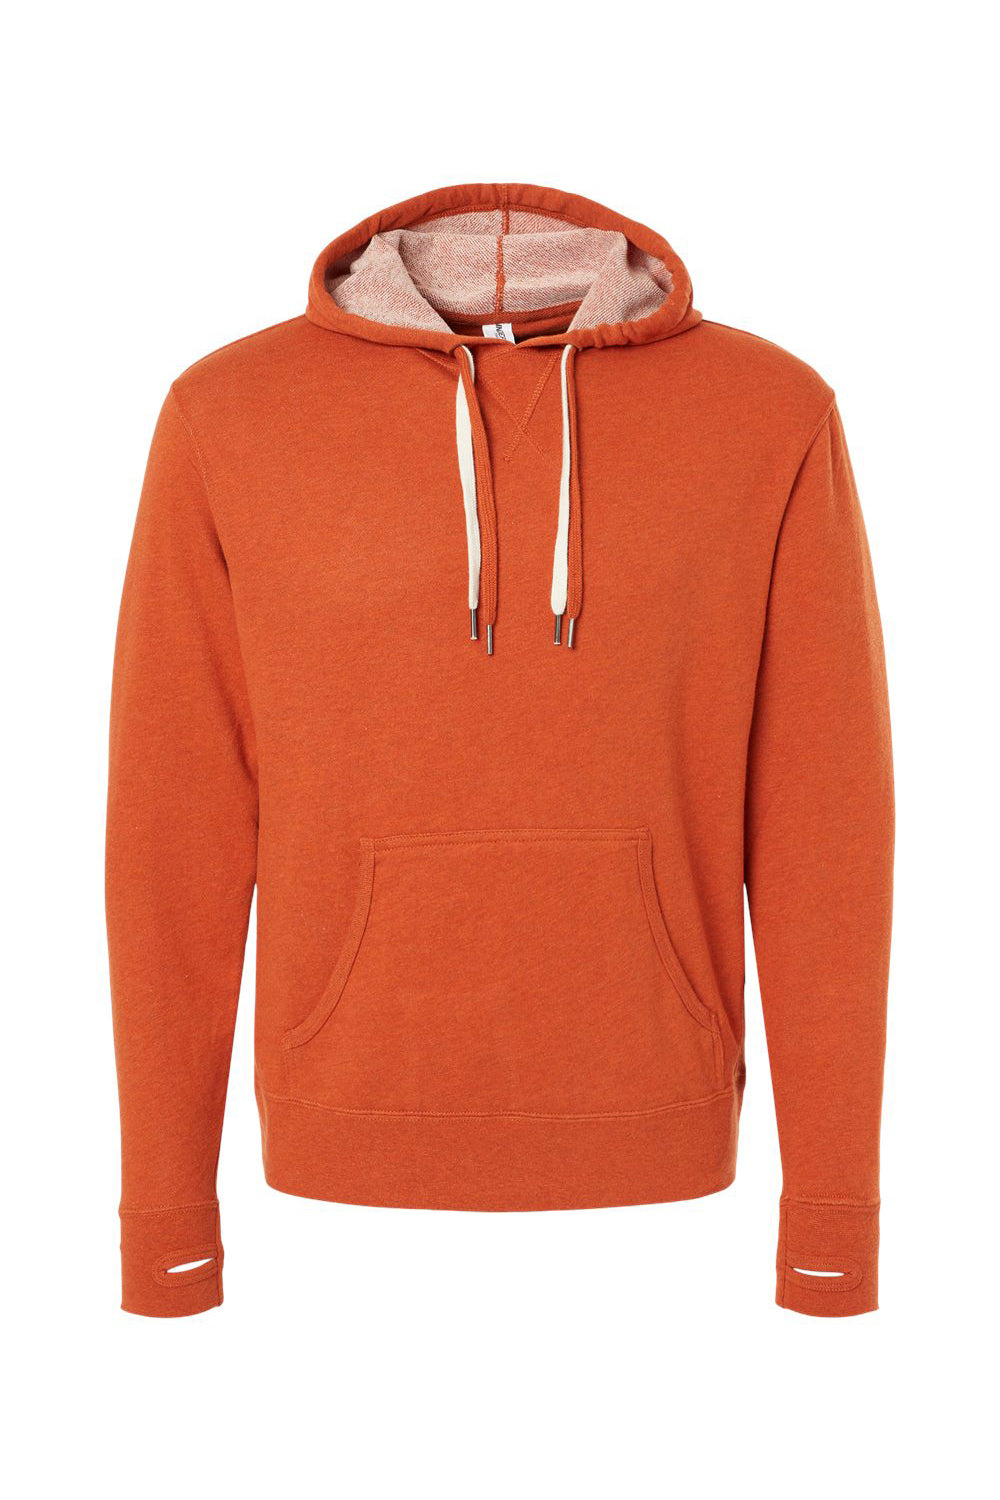 Independent Trading Co. PRM90HT Mens French Terry Hooded Sweatshirt Hoodie Heather Burnt Orange Flat Front